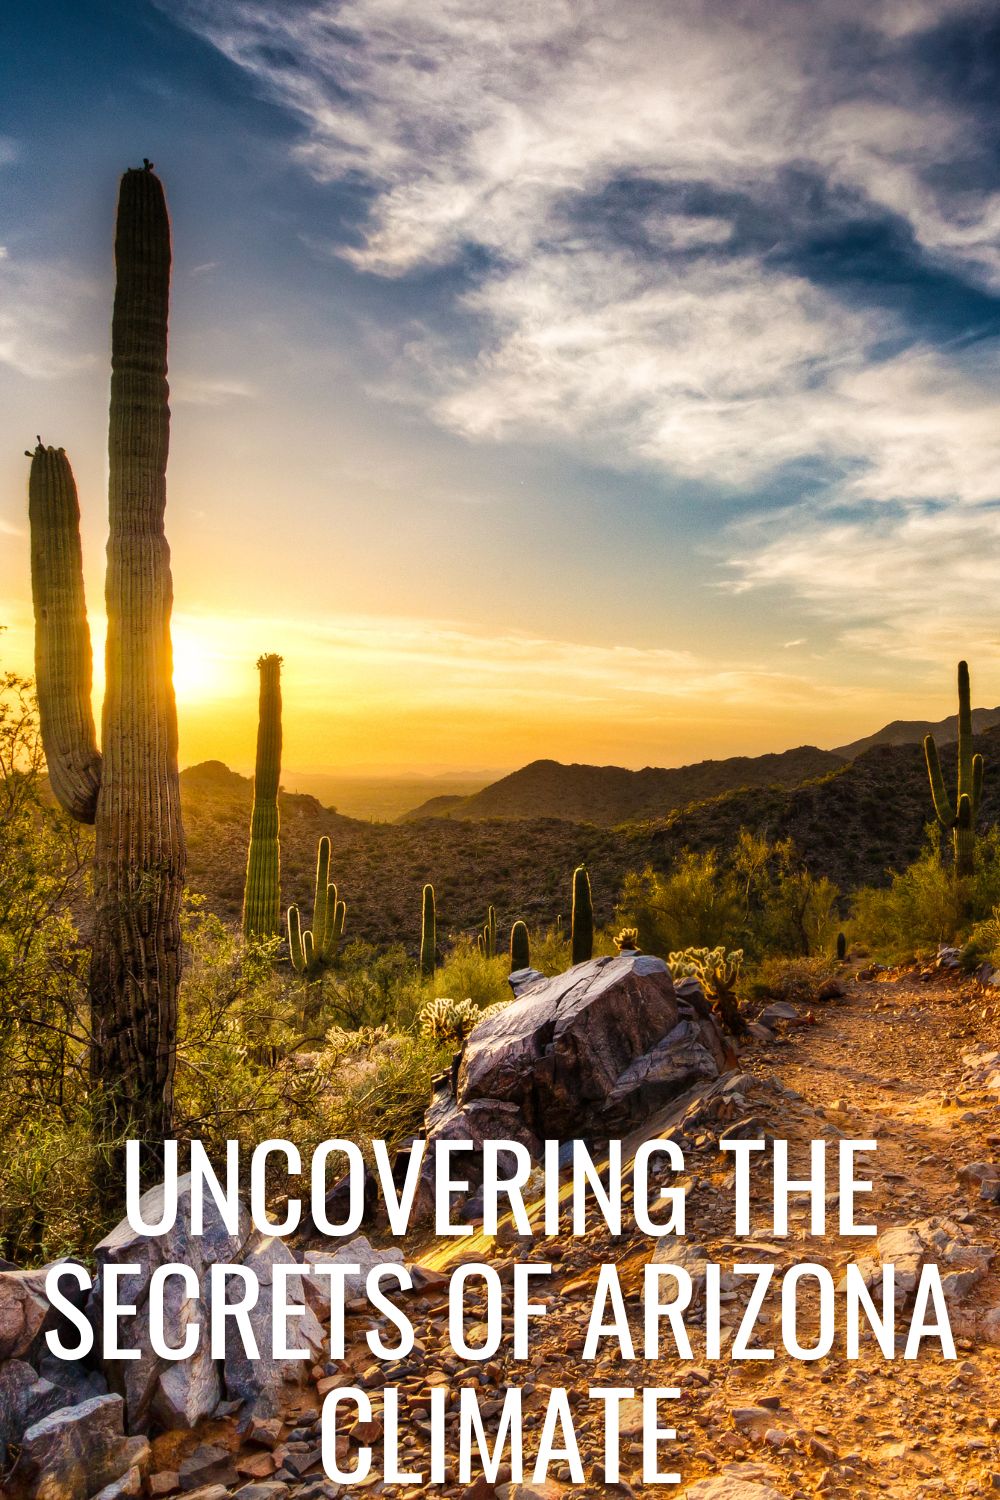 Uncovering the secrets of Arizona climate